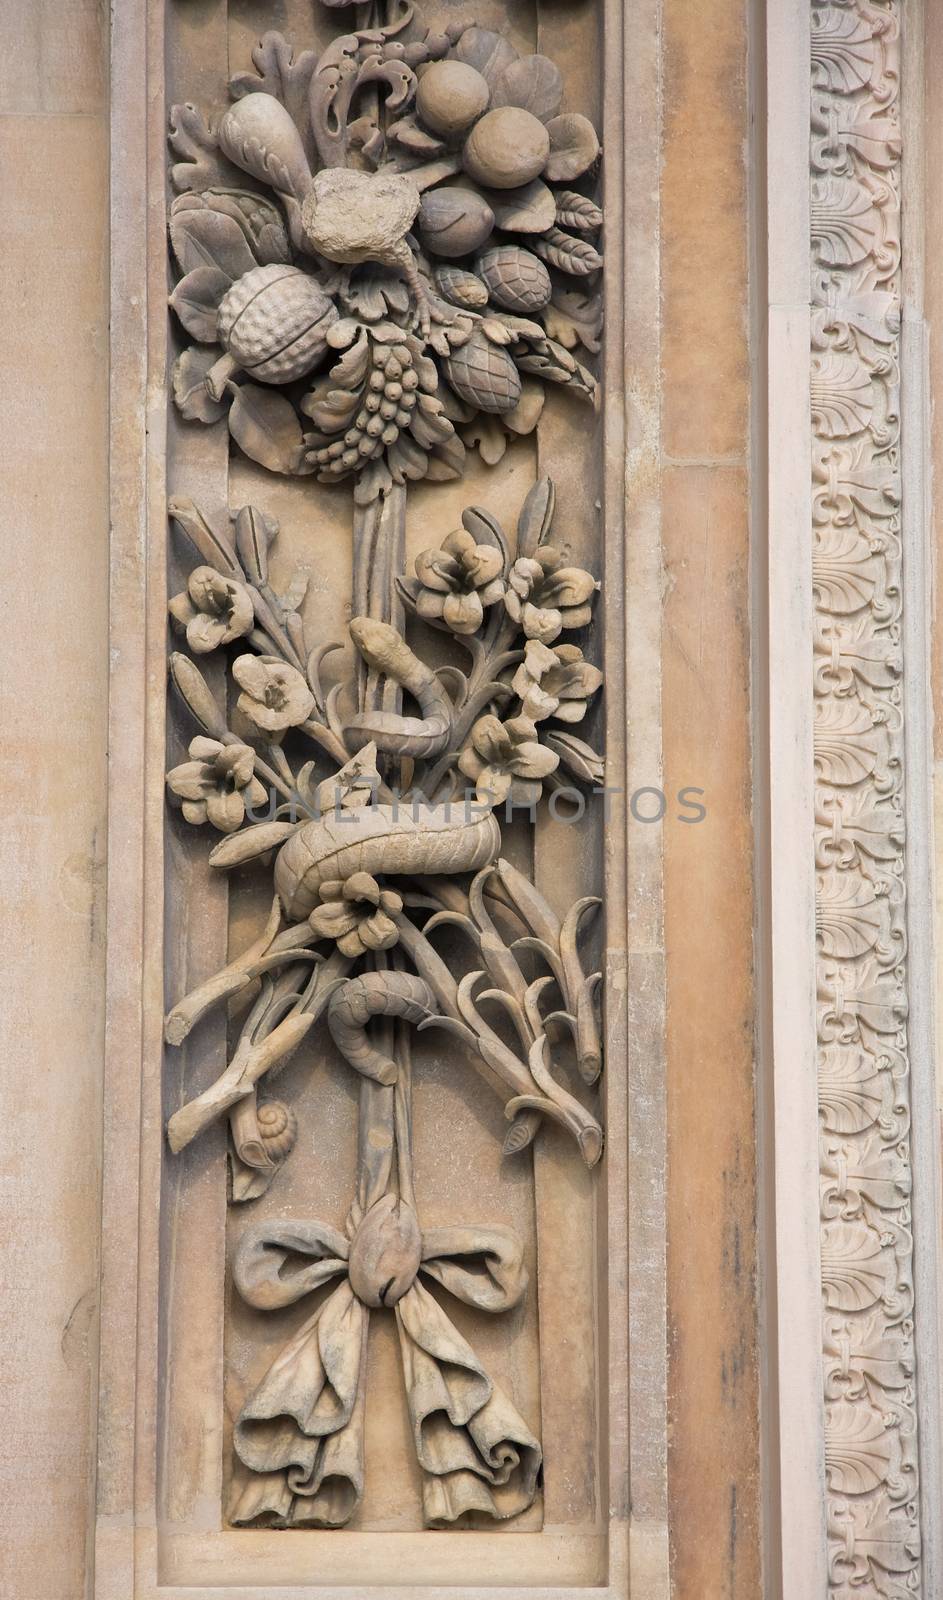 Decorative motif on the facade of Duomo, cathedral in Milan, Italy.